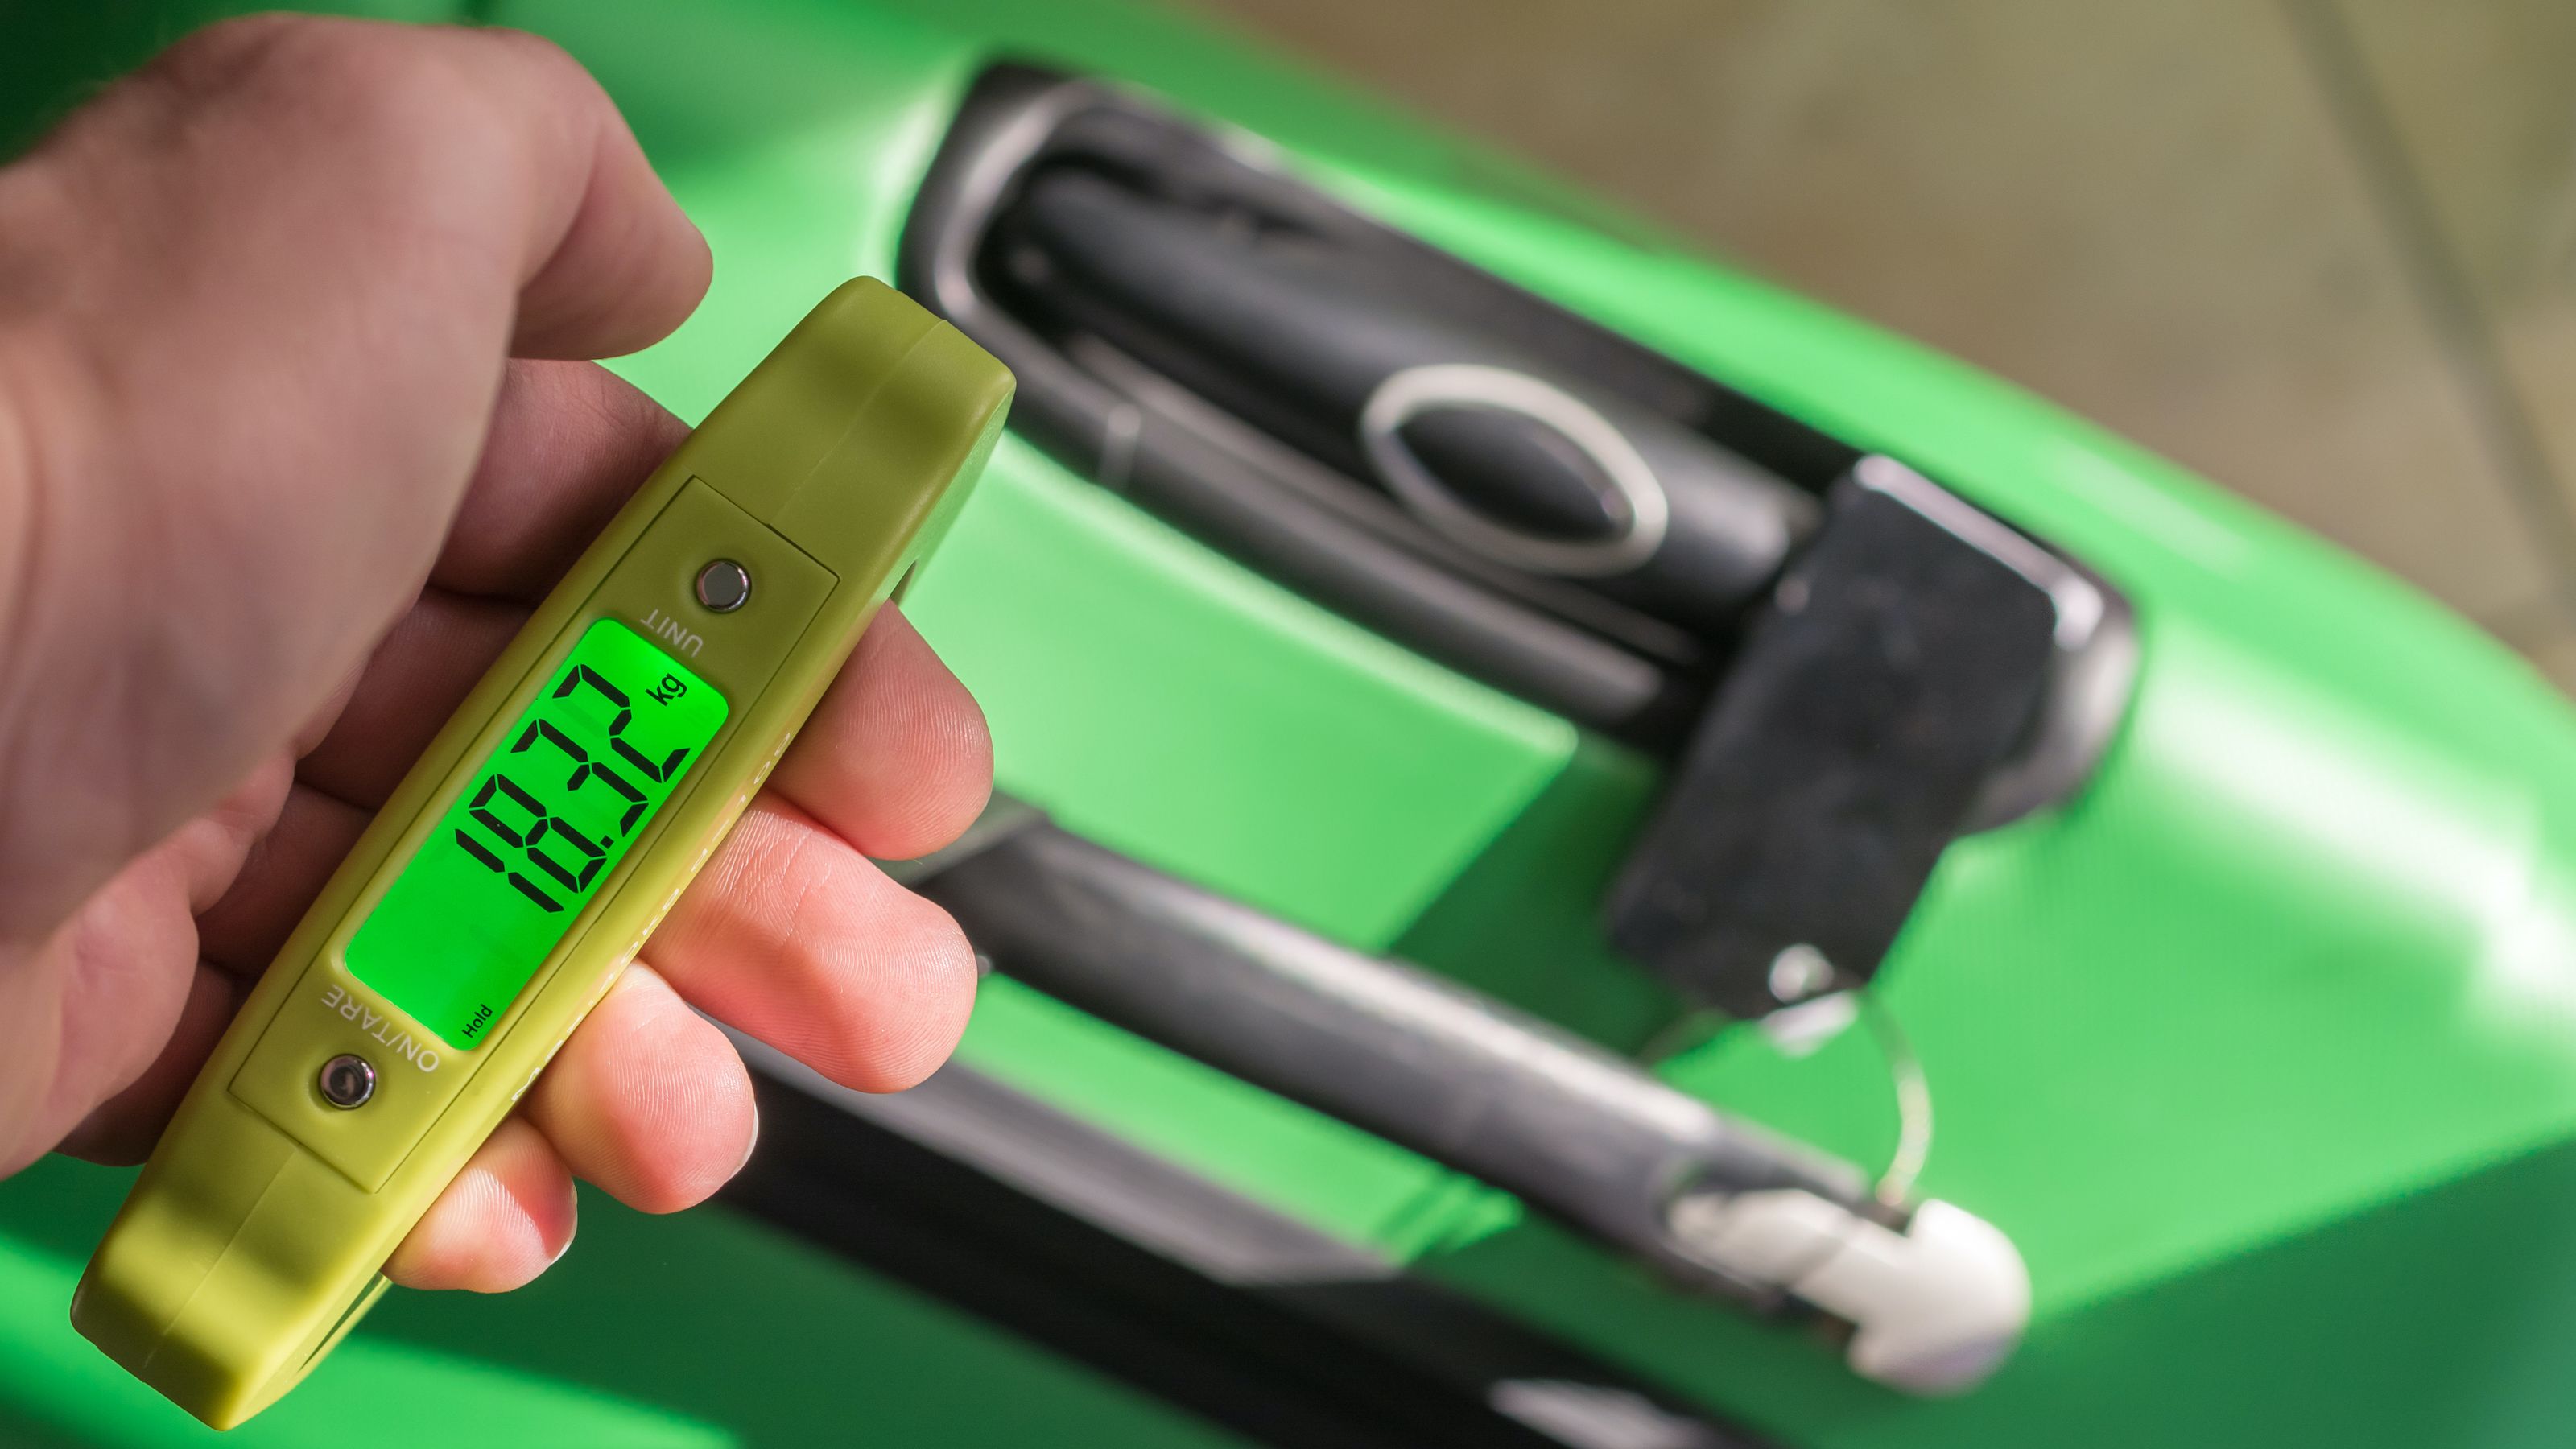 Best Luggage Scale To Help Avoid Baggage Fees